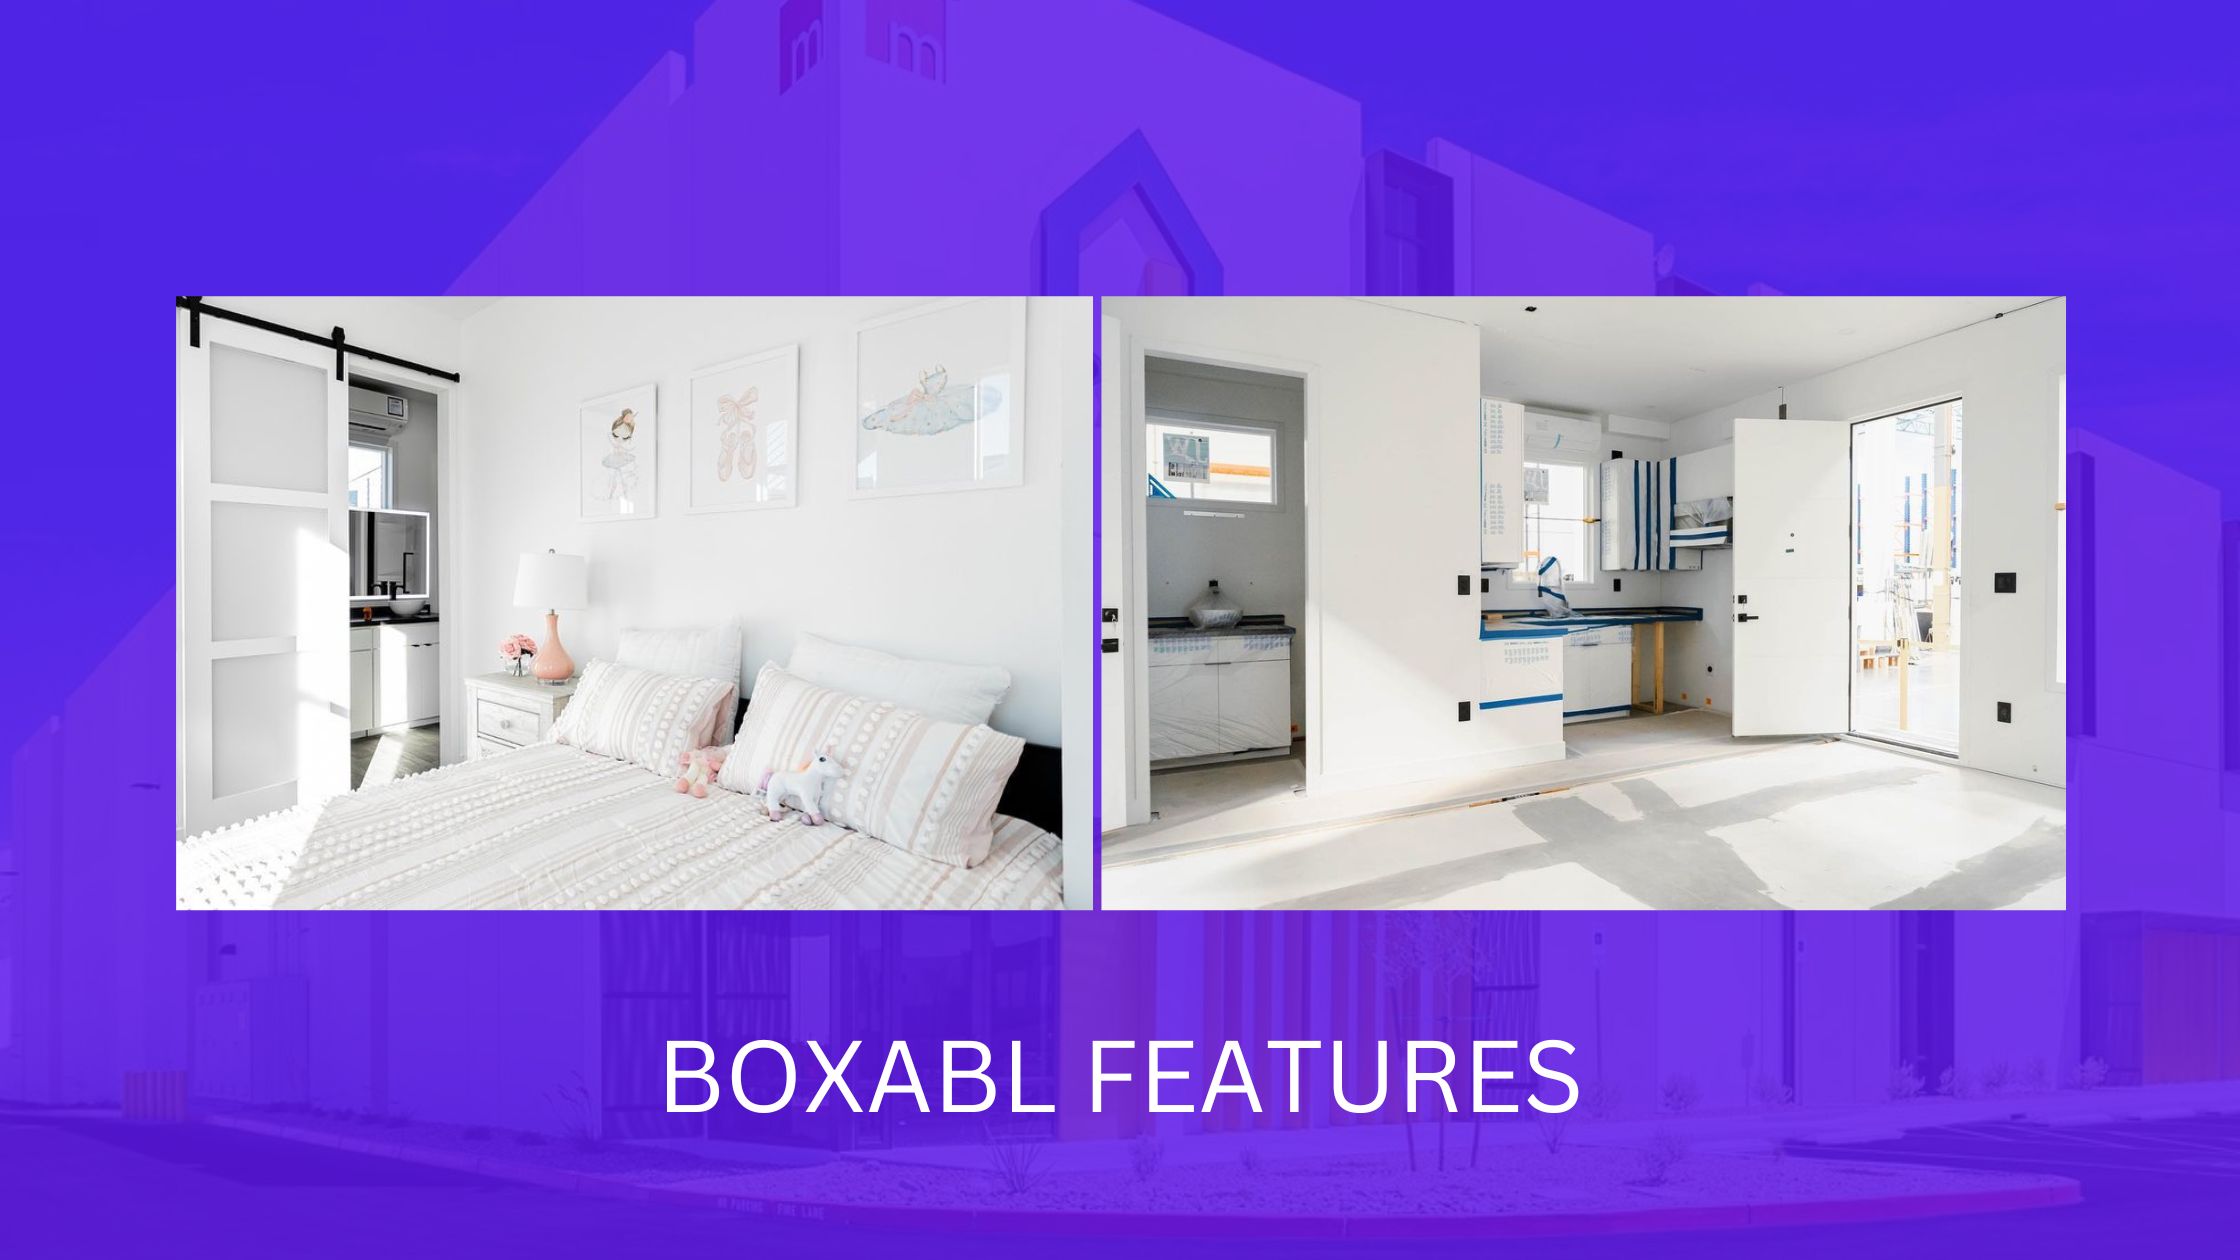 does boxabl have a toilet, does boxabl come furrnished, does boxabl have appliances, does boxabl have 2 bedrrooms, does boxabl have a washer ,boxabl features